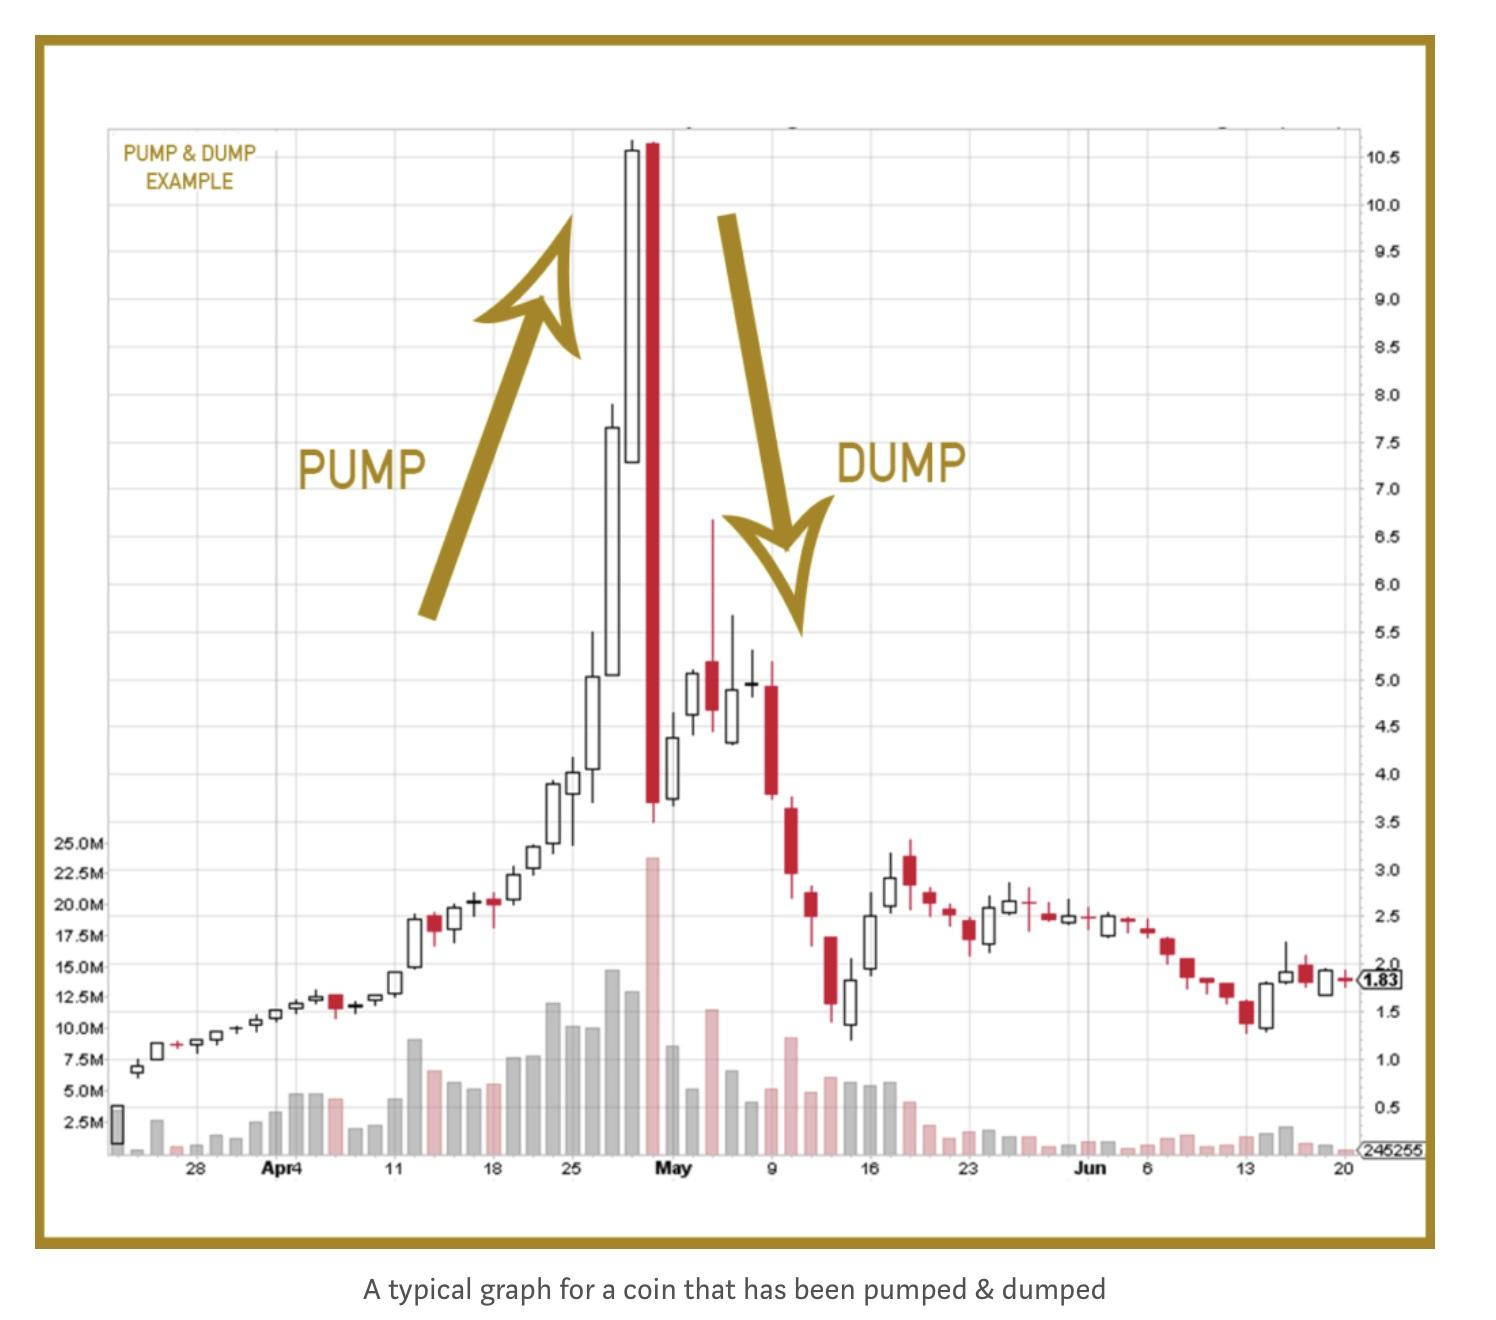 Pump and Dump example.